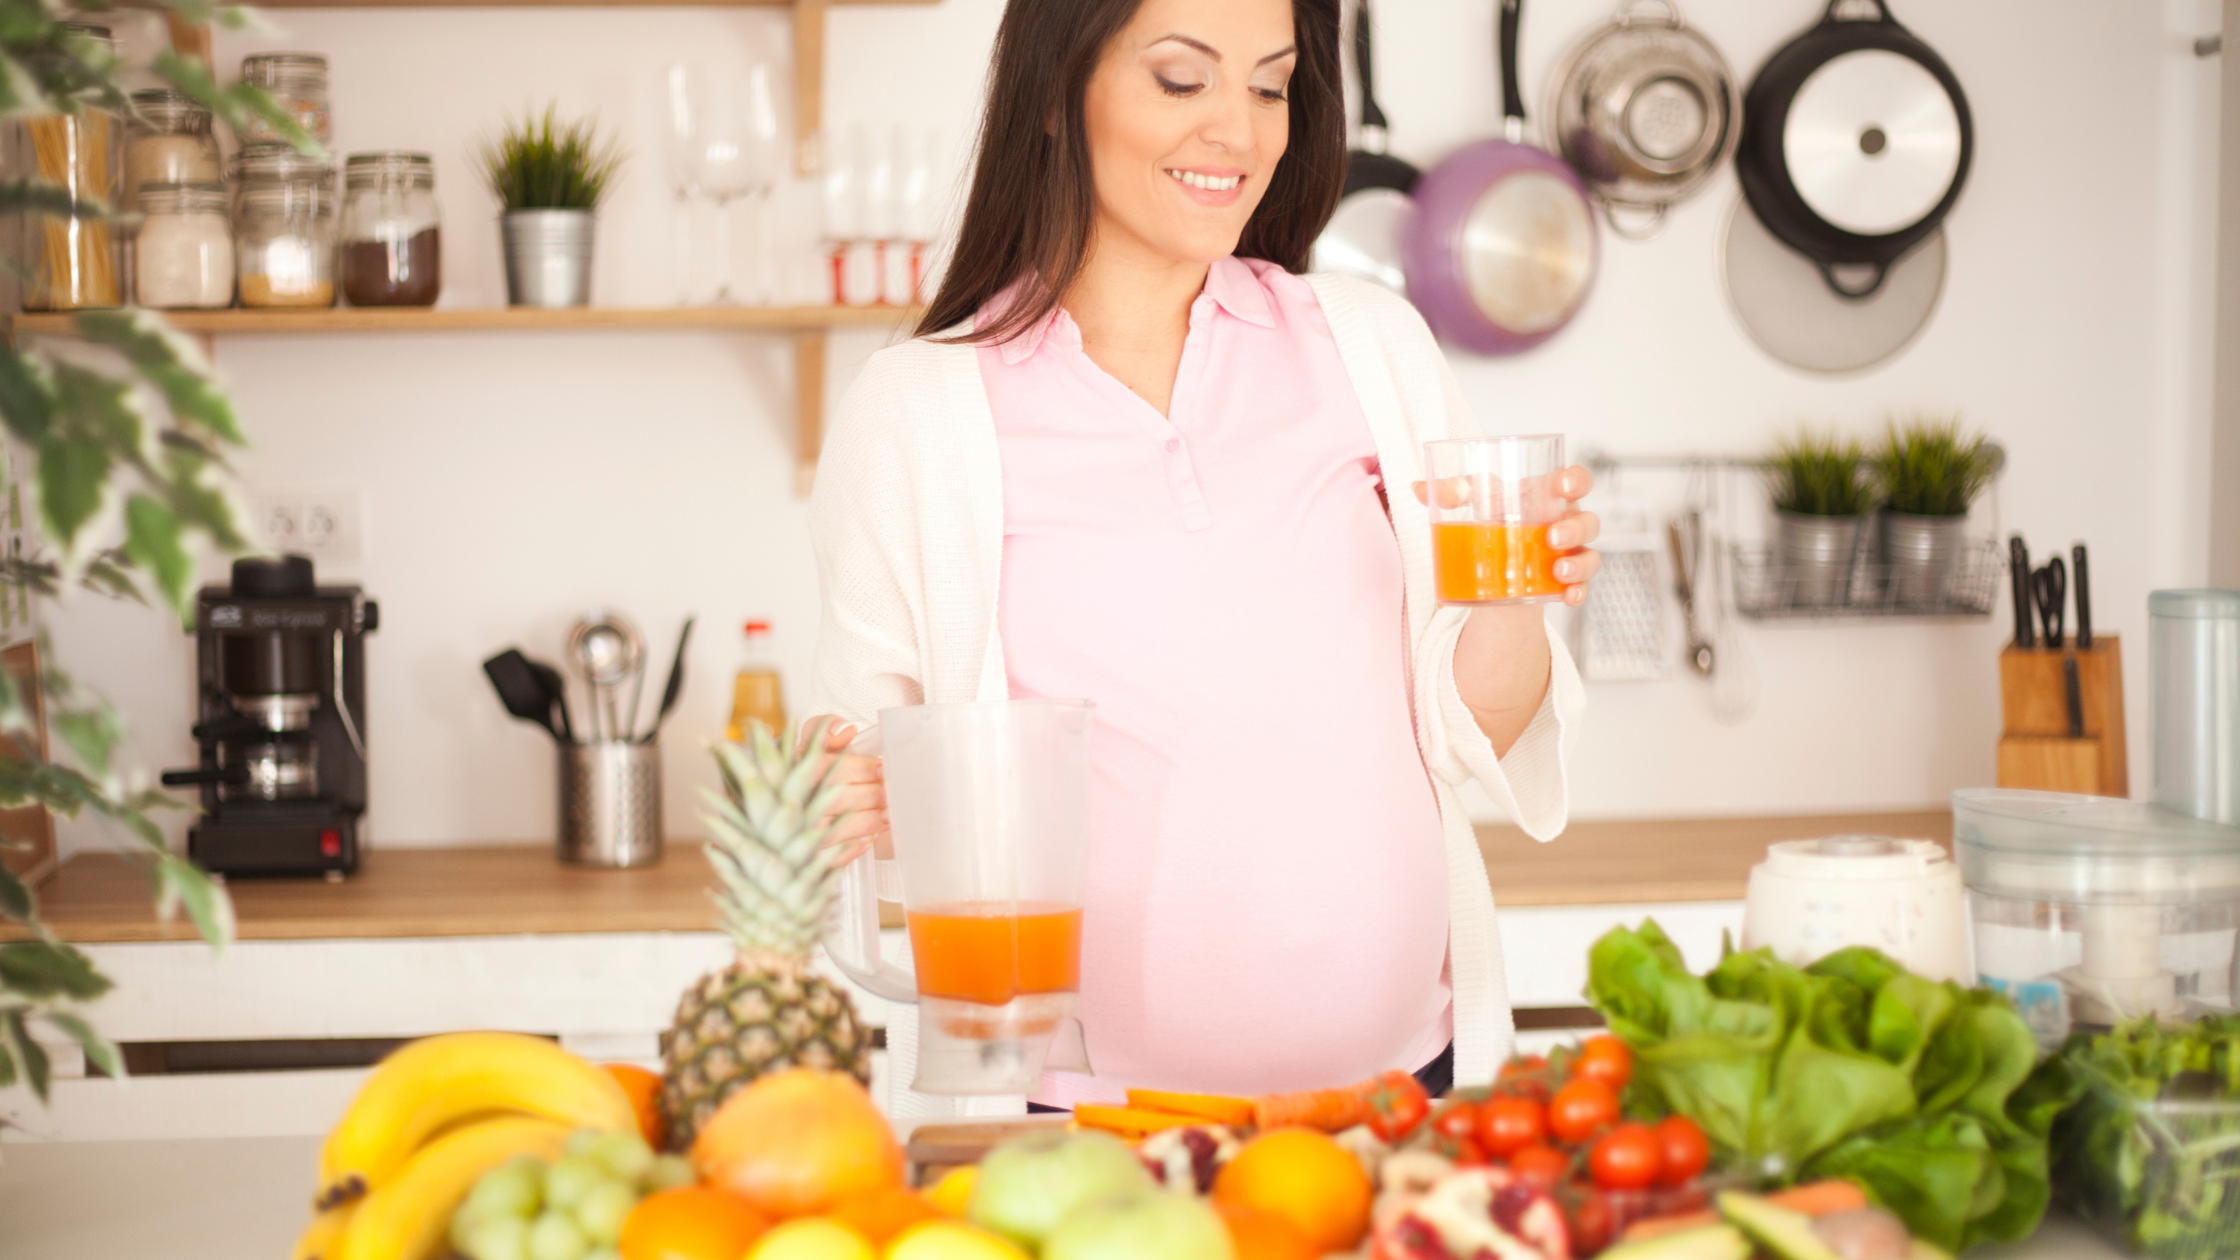 13 Powerful Pregnancy Smoothies Recipes for Pregnant Women